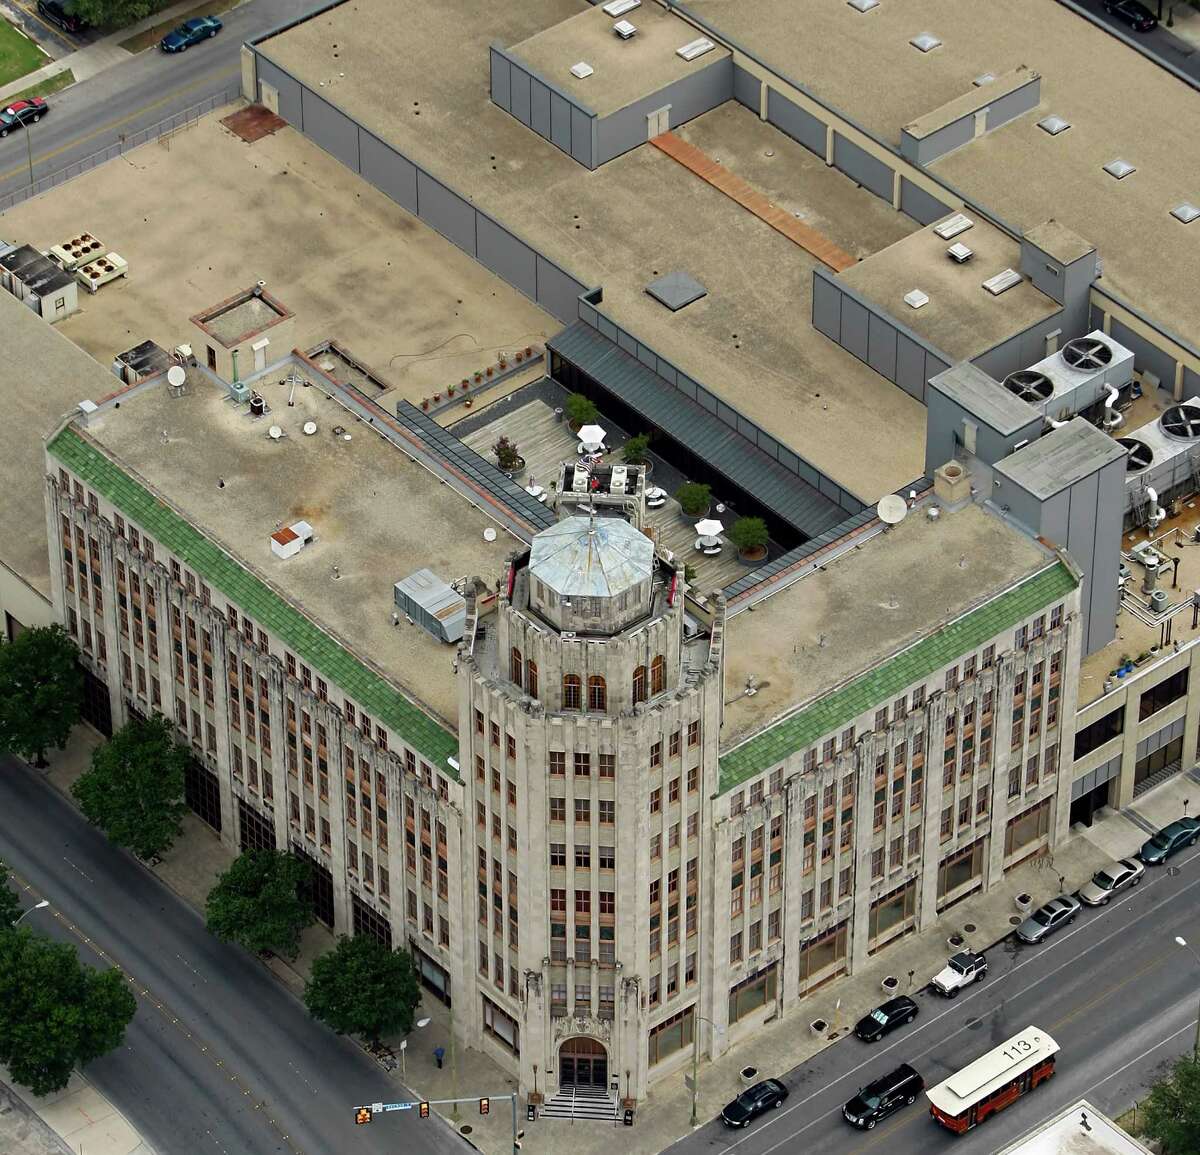 The San Antonio Express-News building is seen in this Friday July 1, 2011 aerial picture.